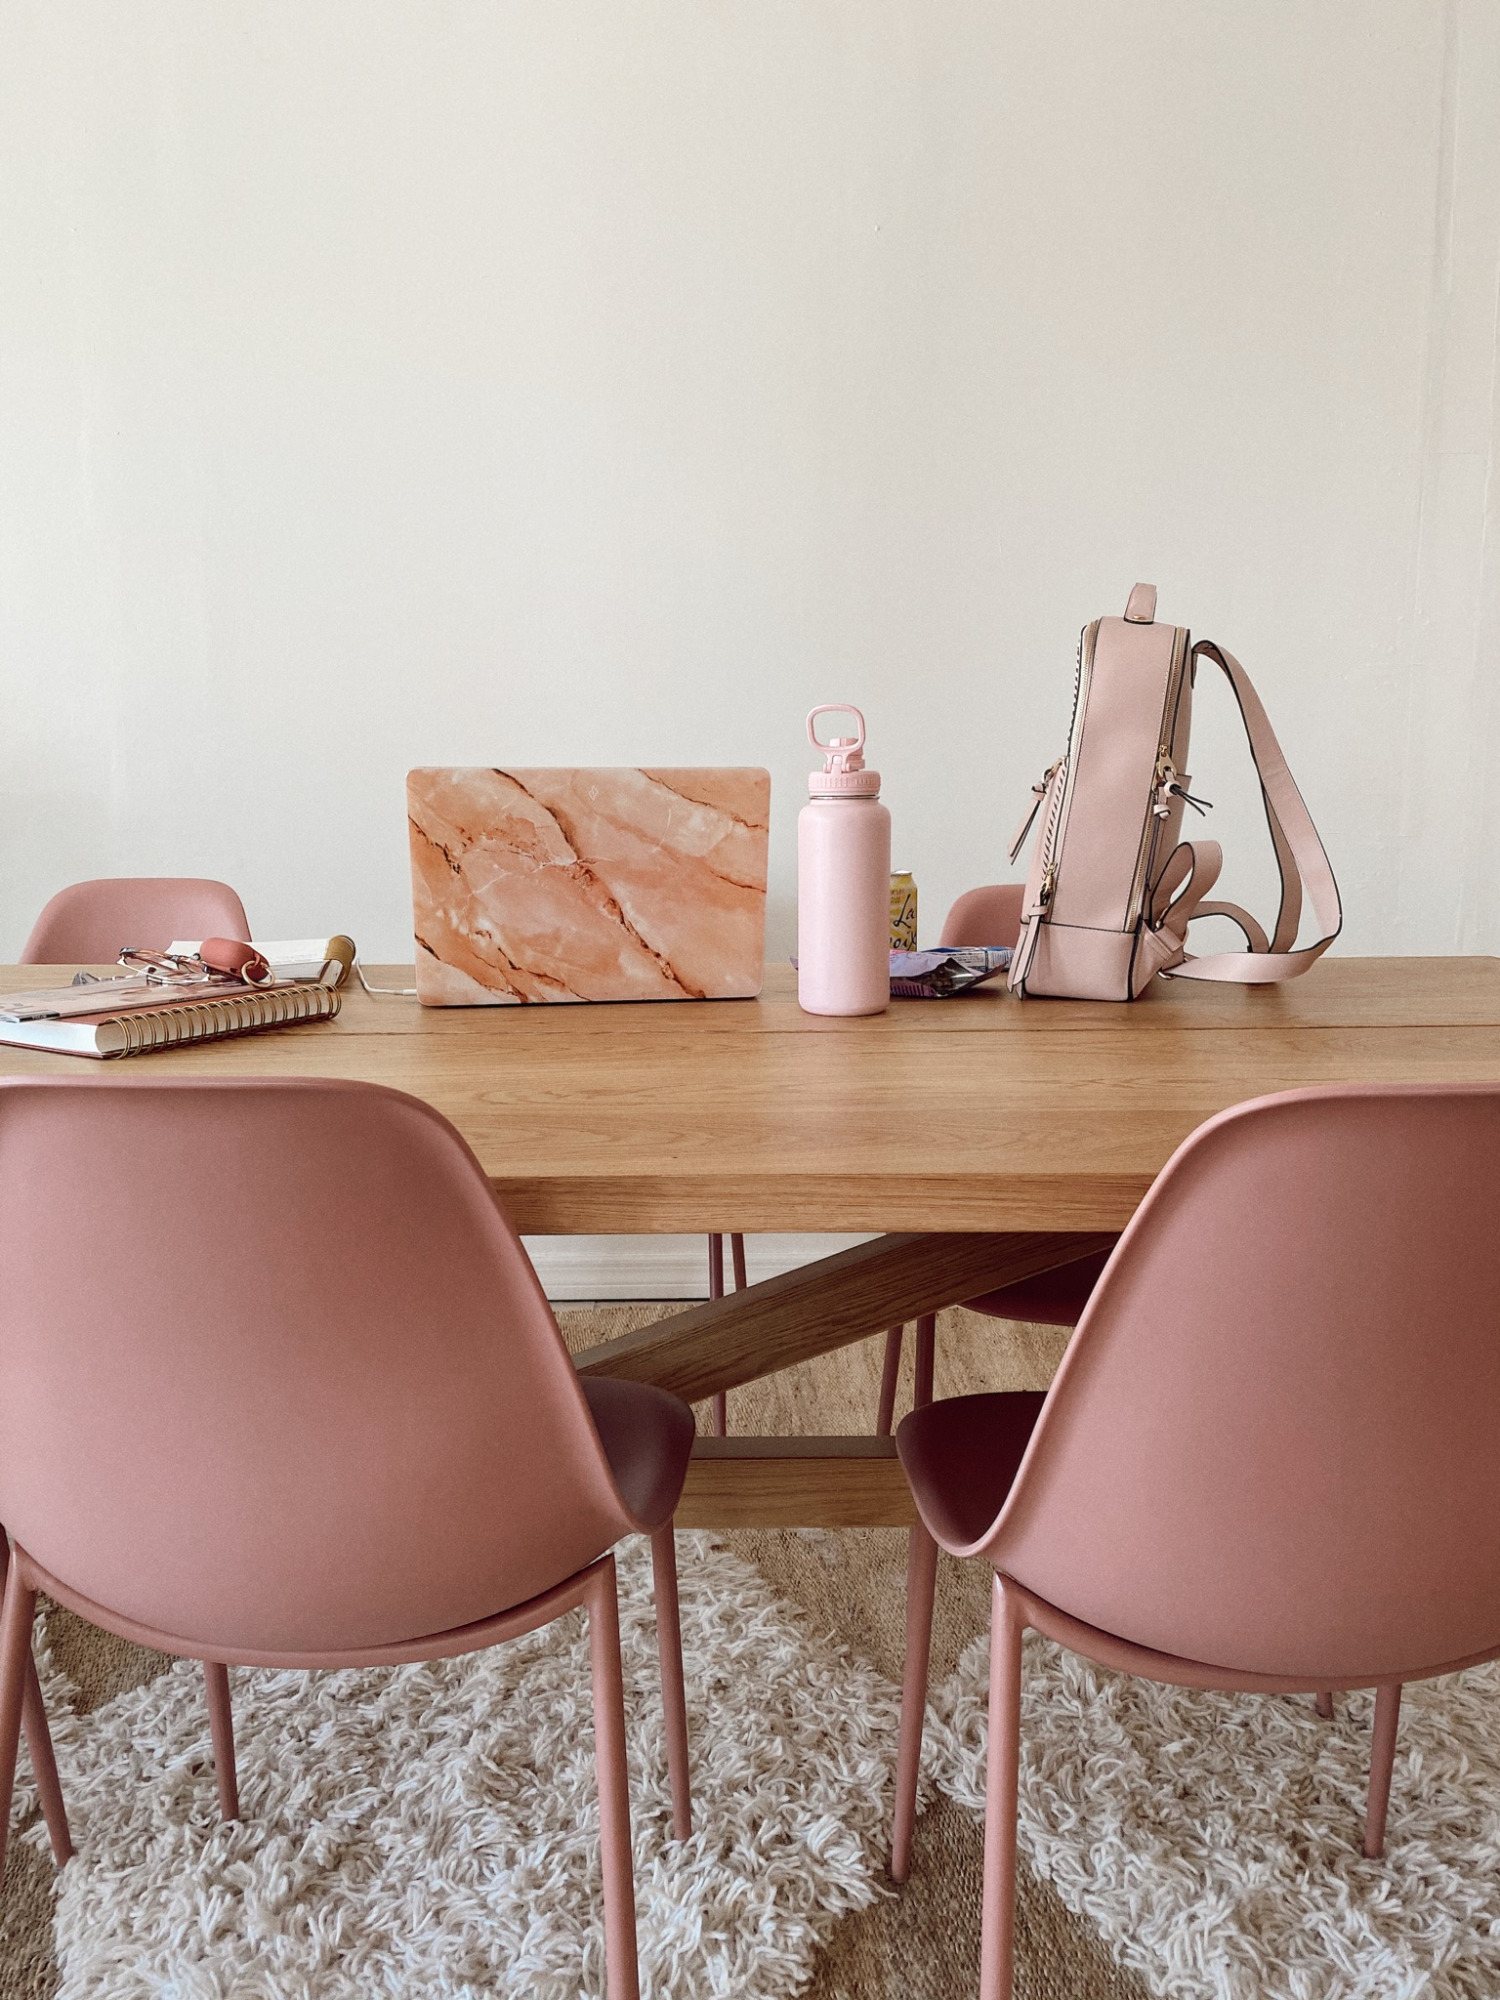 Pink Waterbottle, Golden Coil Notebook, Working from Home, Pink Office, Pink chairs, Article Chairs, Burga Phone Case, Burga Laptop Case, MacBook Pro, Calpak Laptop Backpack, Coworking Space, Female Entrepreneur, Black Girls That Blog, Content Creator, Pink office inspiration